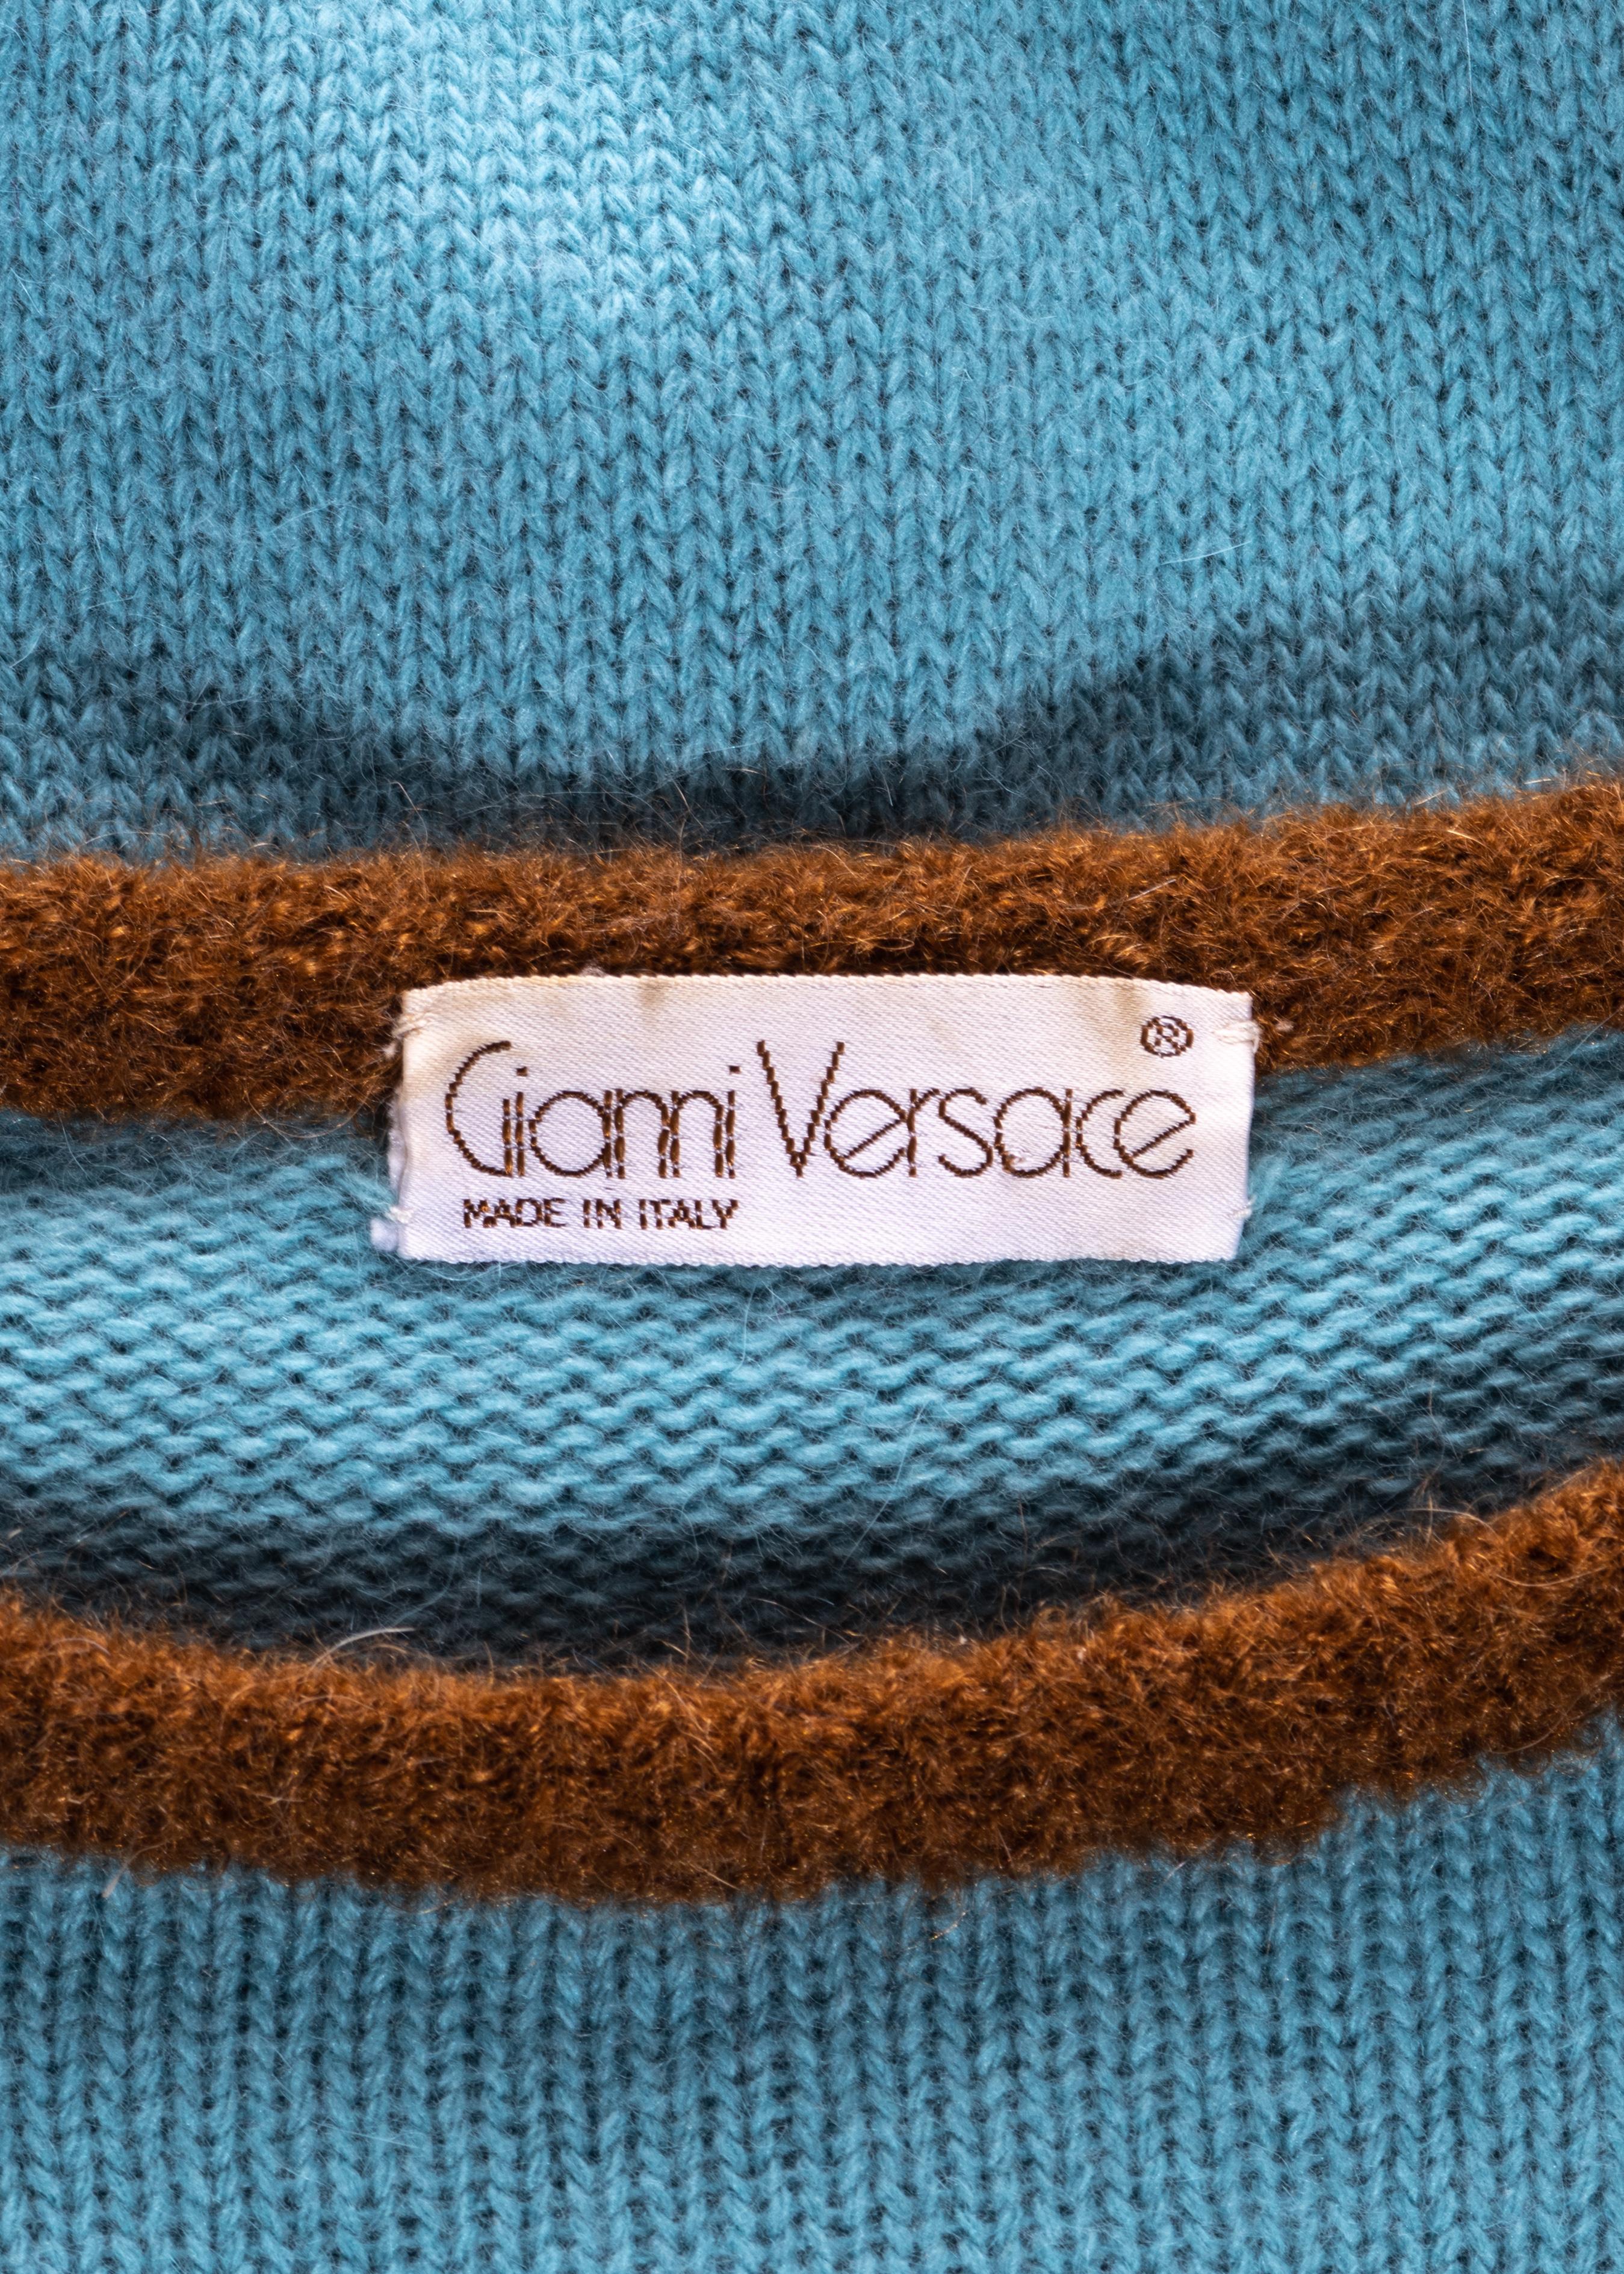 Black Gianni Versace multicoloured knitted mohair sweater, fw 1982